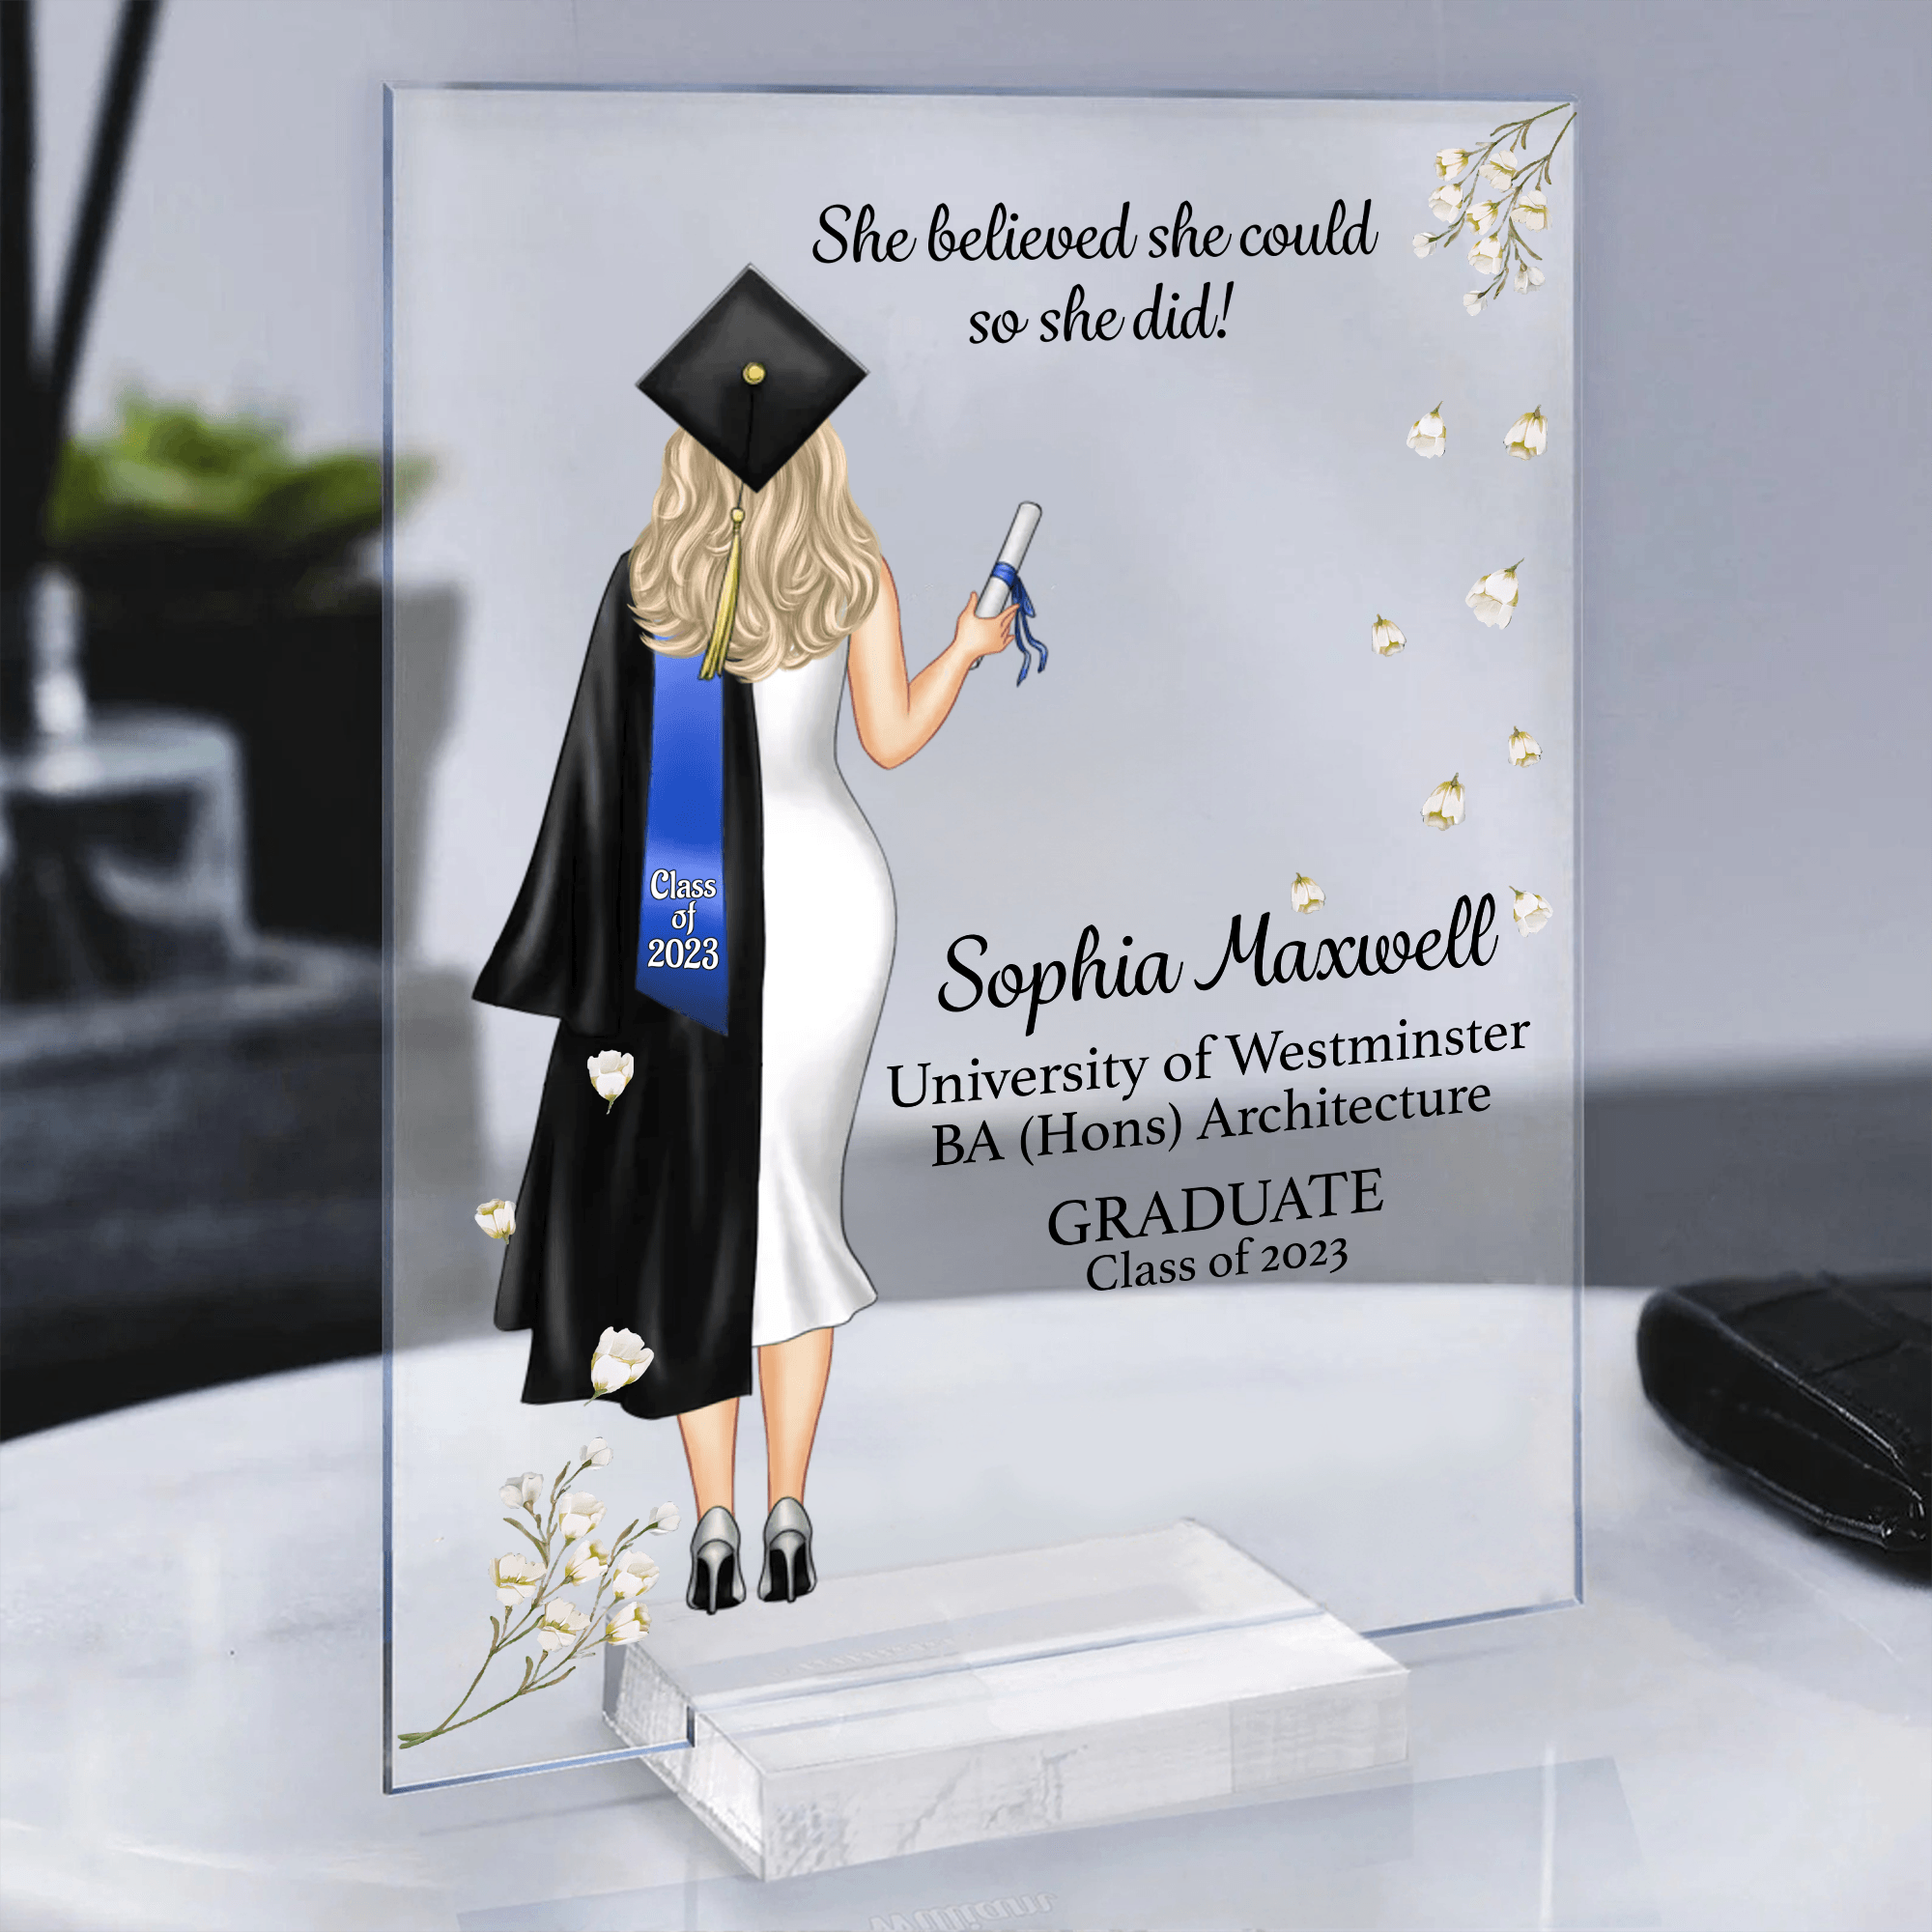 Graduation Gifts, Presents & Ideas For Her, Grad Ceremony, Commencement, Convocation, College & uni University, Personalized Custom Acrylic Plaque - Suzitee Store